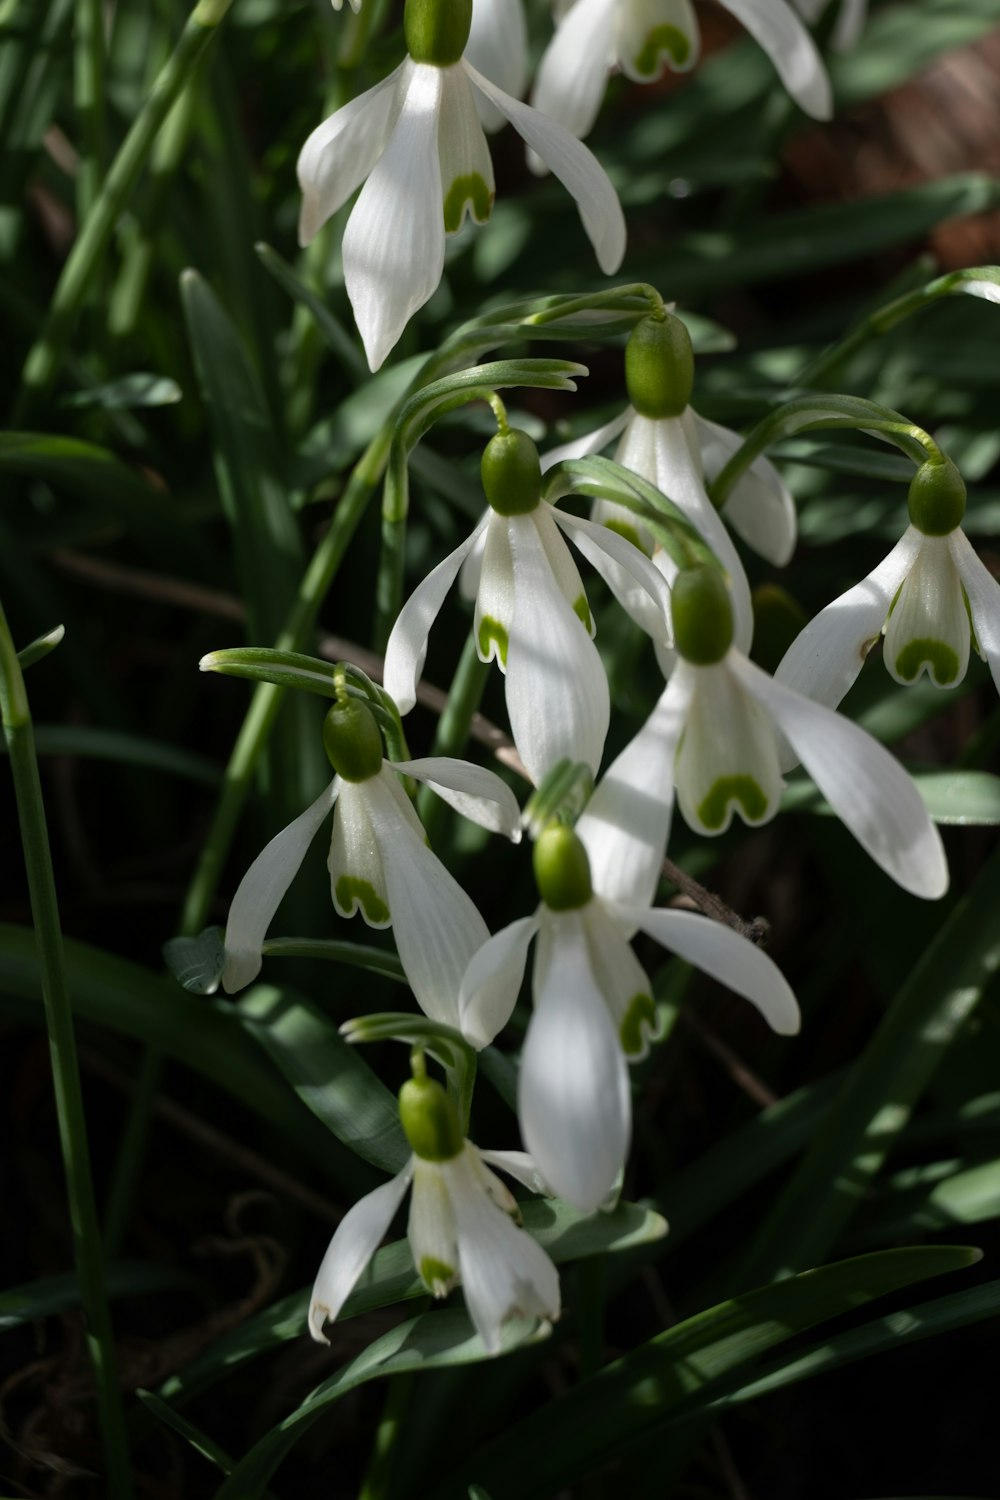 a group of white flowers with green stems